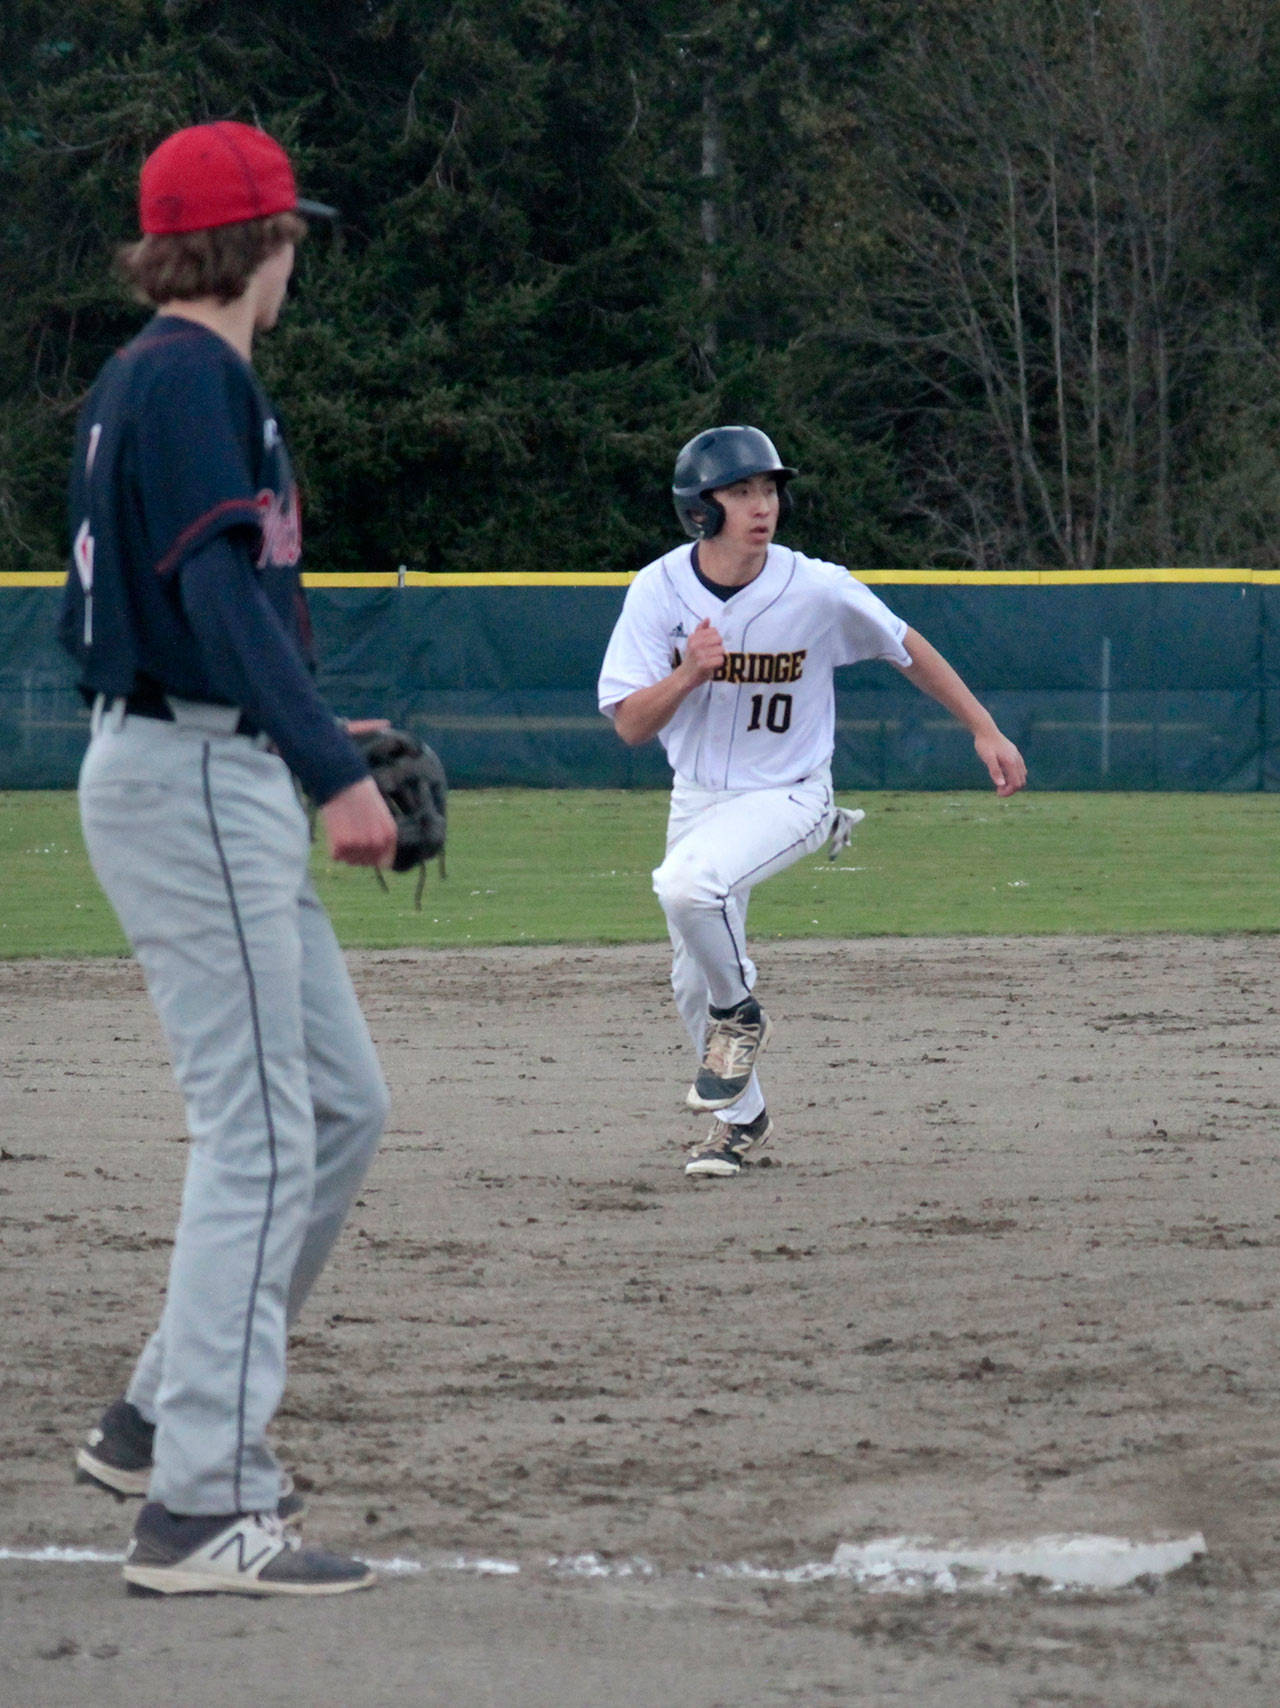 The Bainbridge High varsity baseball team scored a decisive victory against Nathan Hale last week, rebounding from a disappointing loss to Lakeside days before. (Luciano Marano | Bainbridge Island Review)